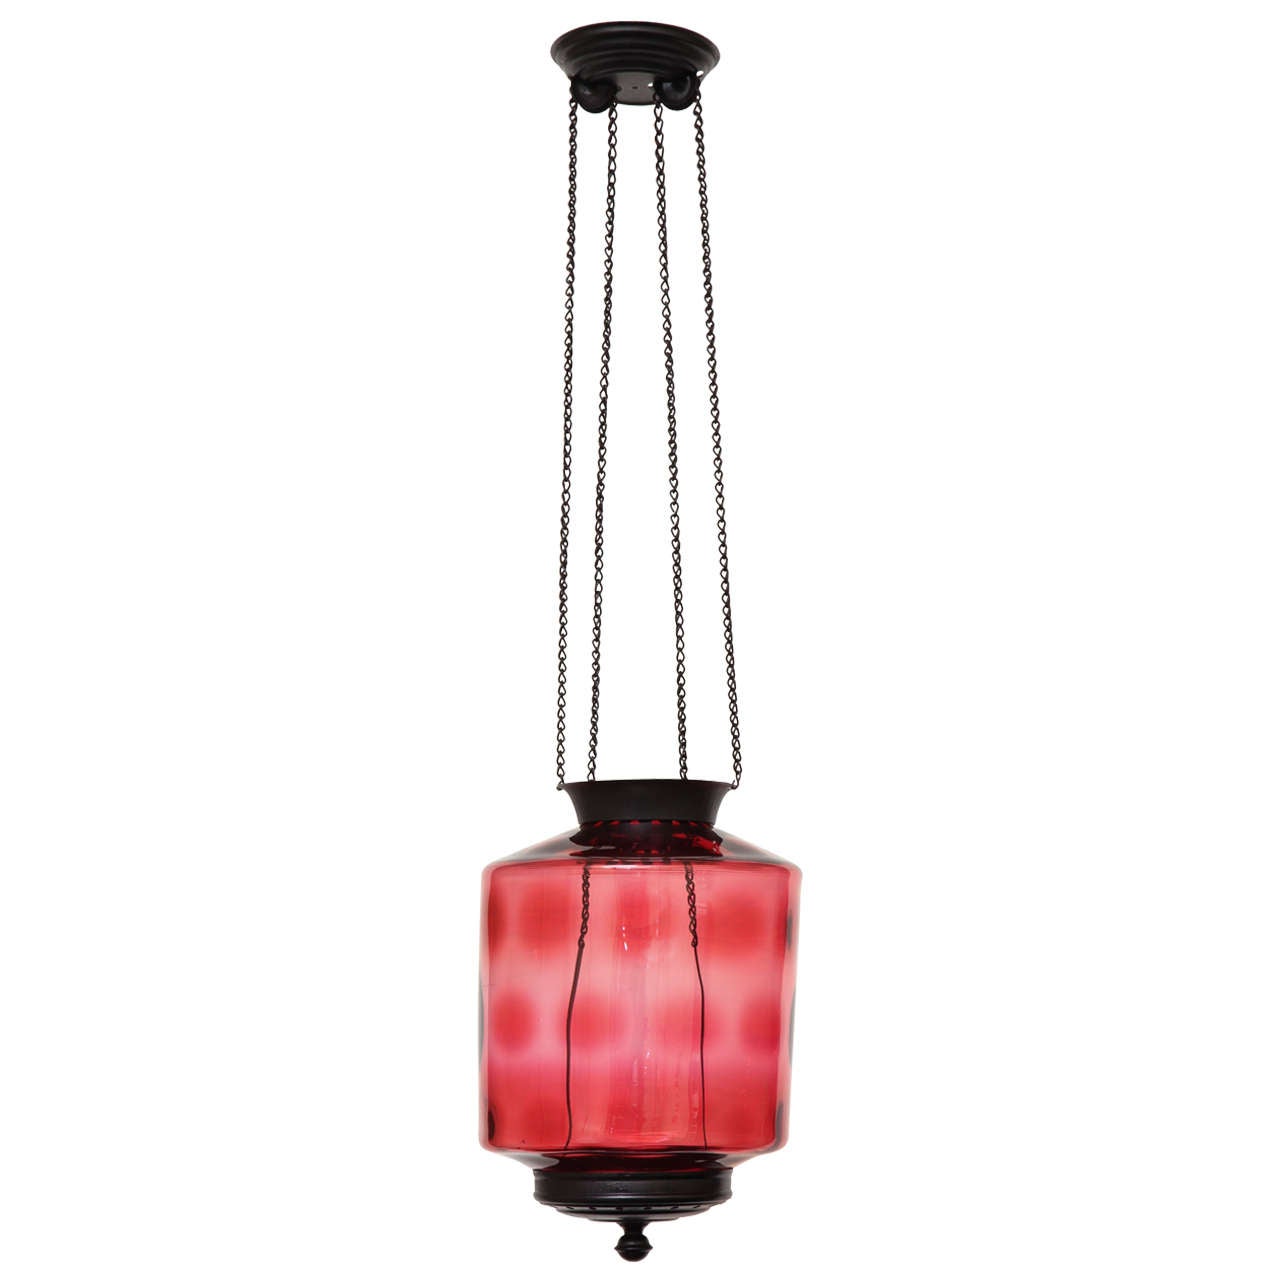 Anglo Indian Cranberry Colored Lantern For Sale